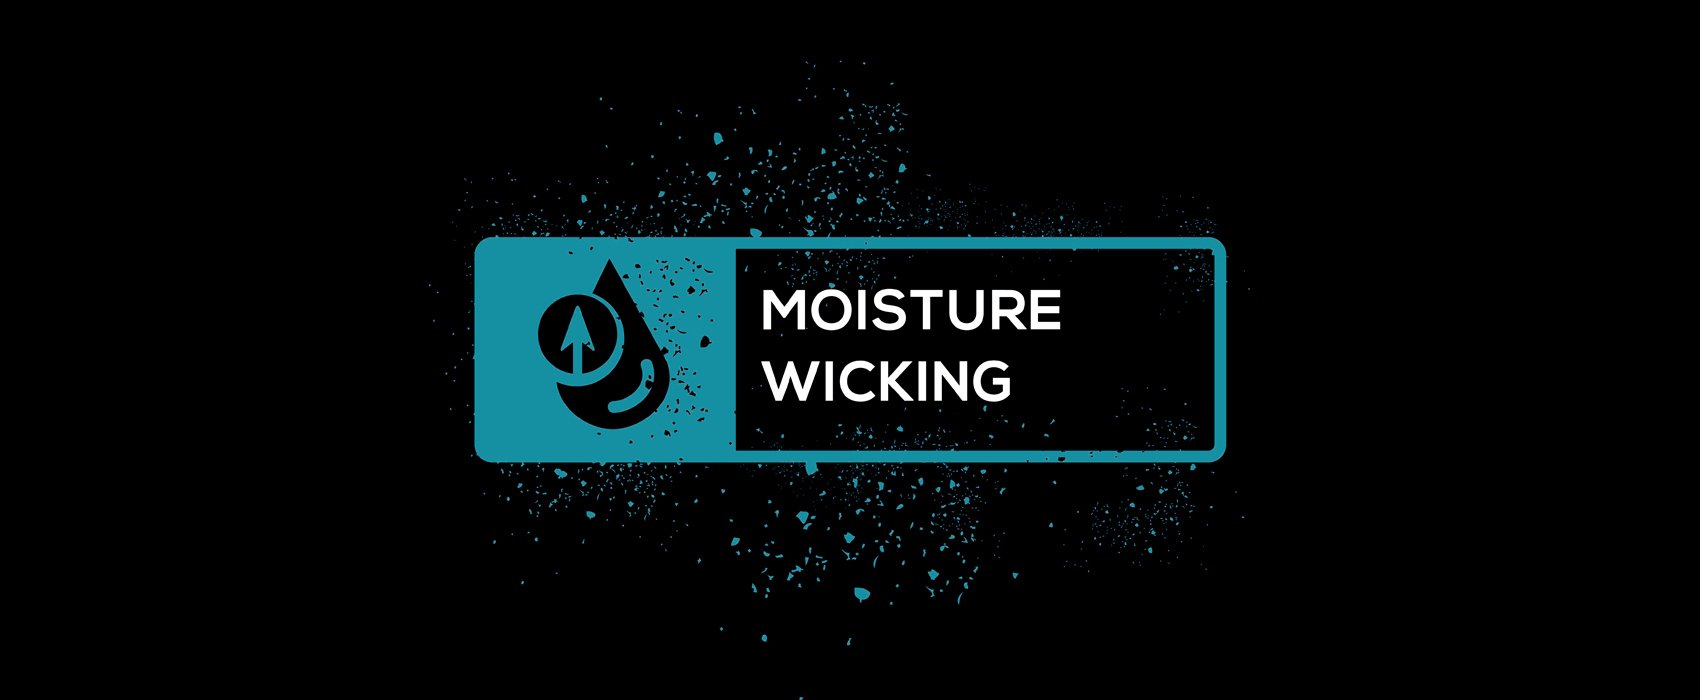 What Does Moisture-Wicking Mean?